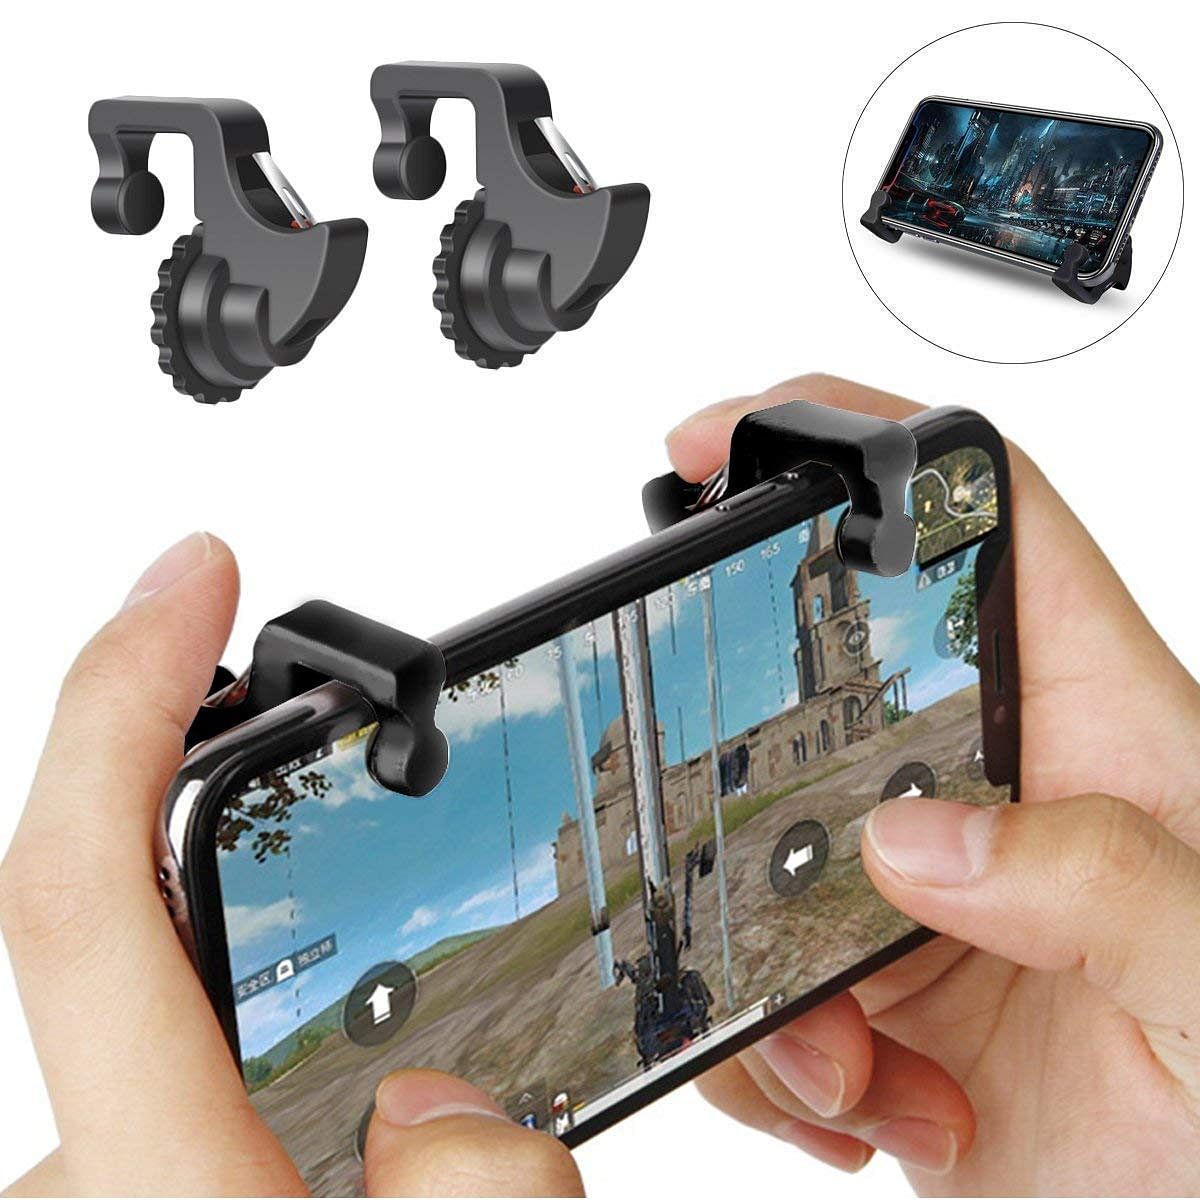 These gaming accessories can convert your regular smartphone into a proper gaming console. 